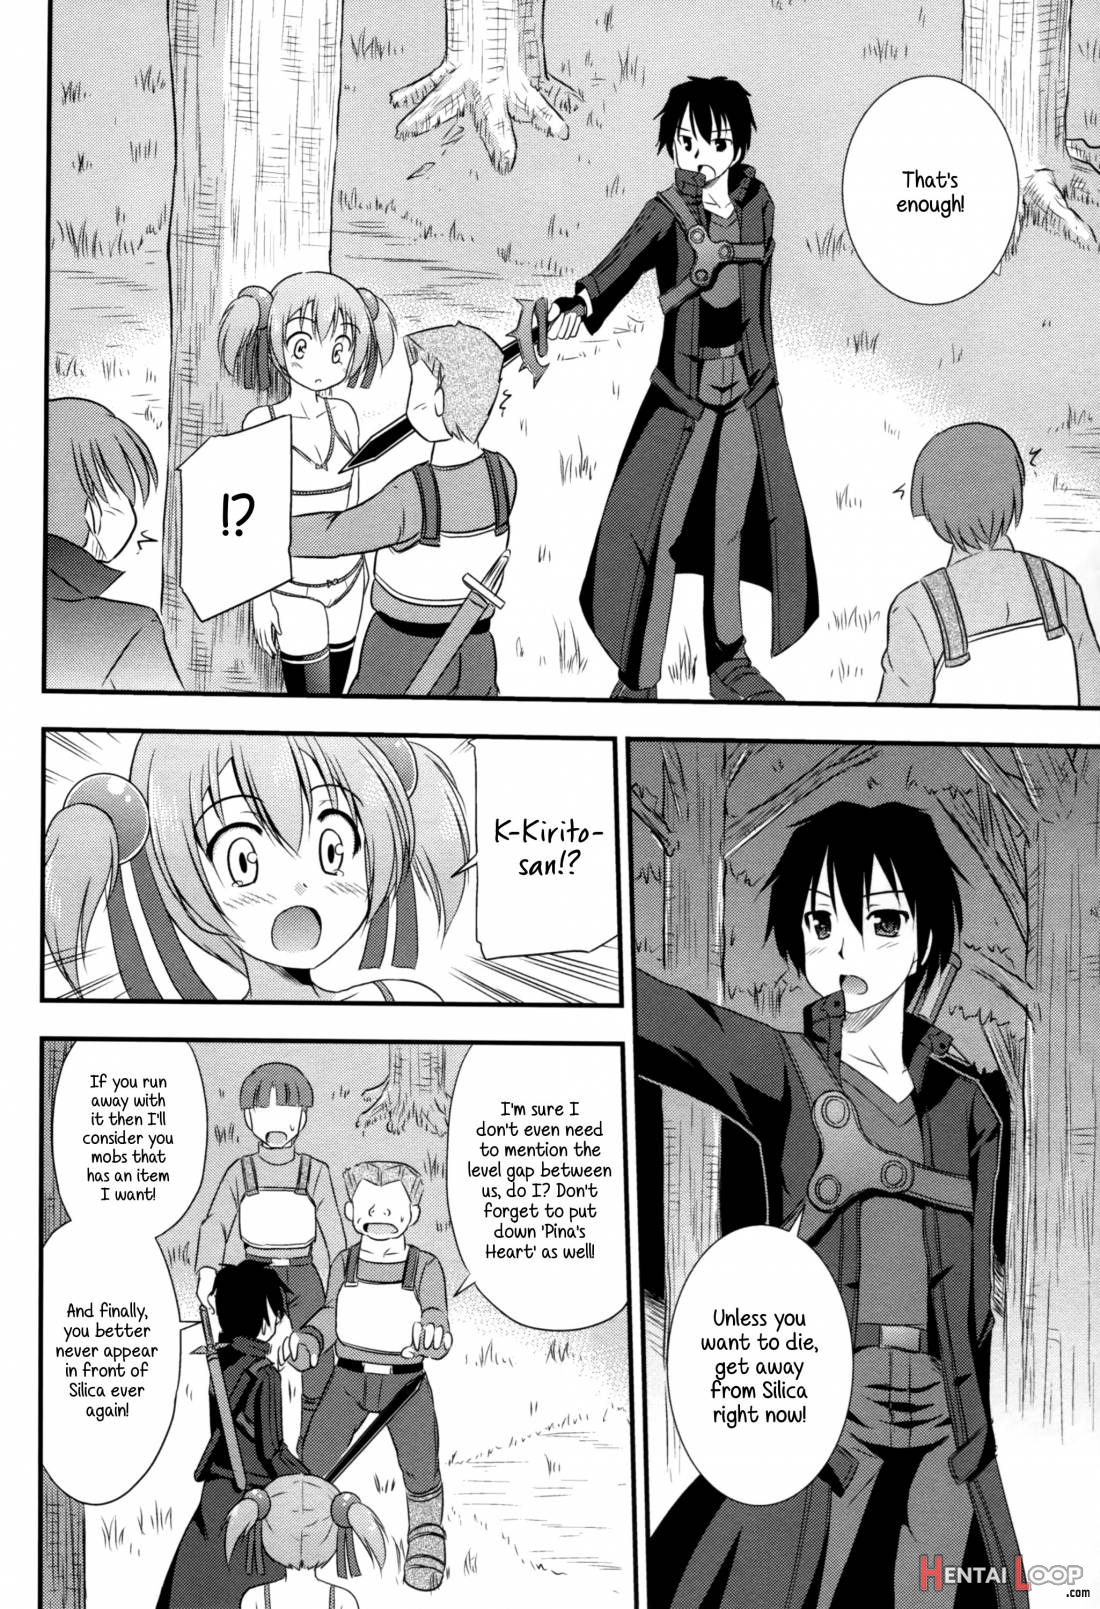 Silica Route Online page 8